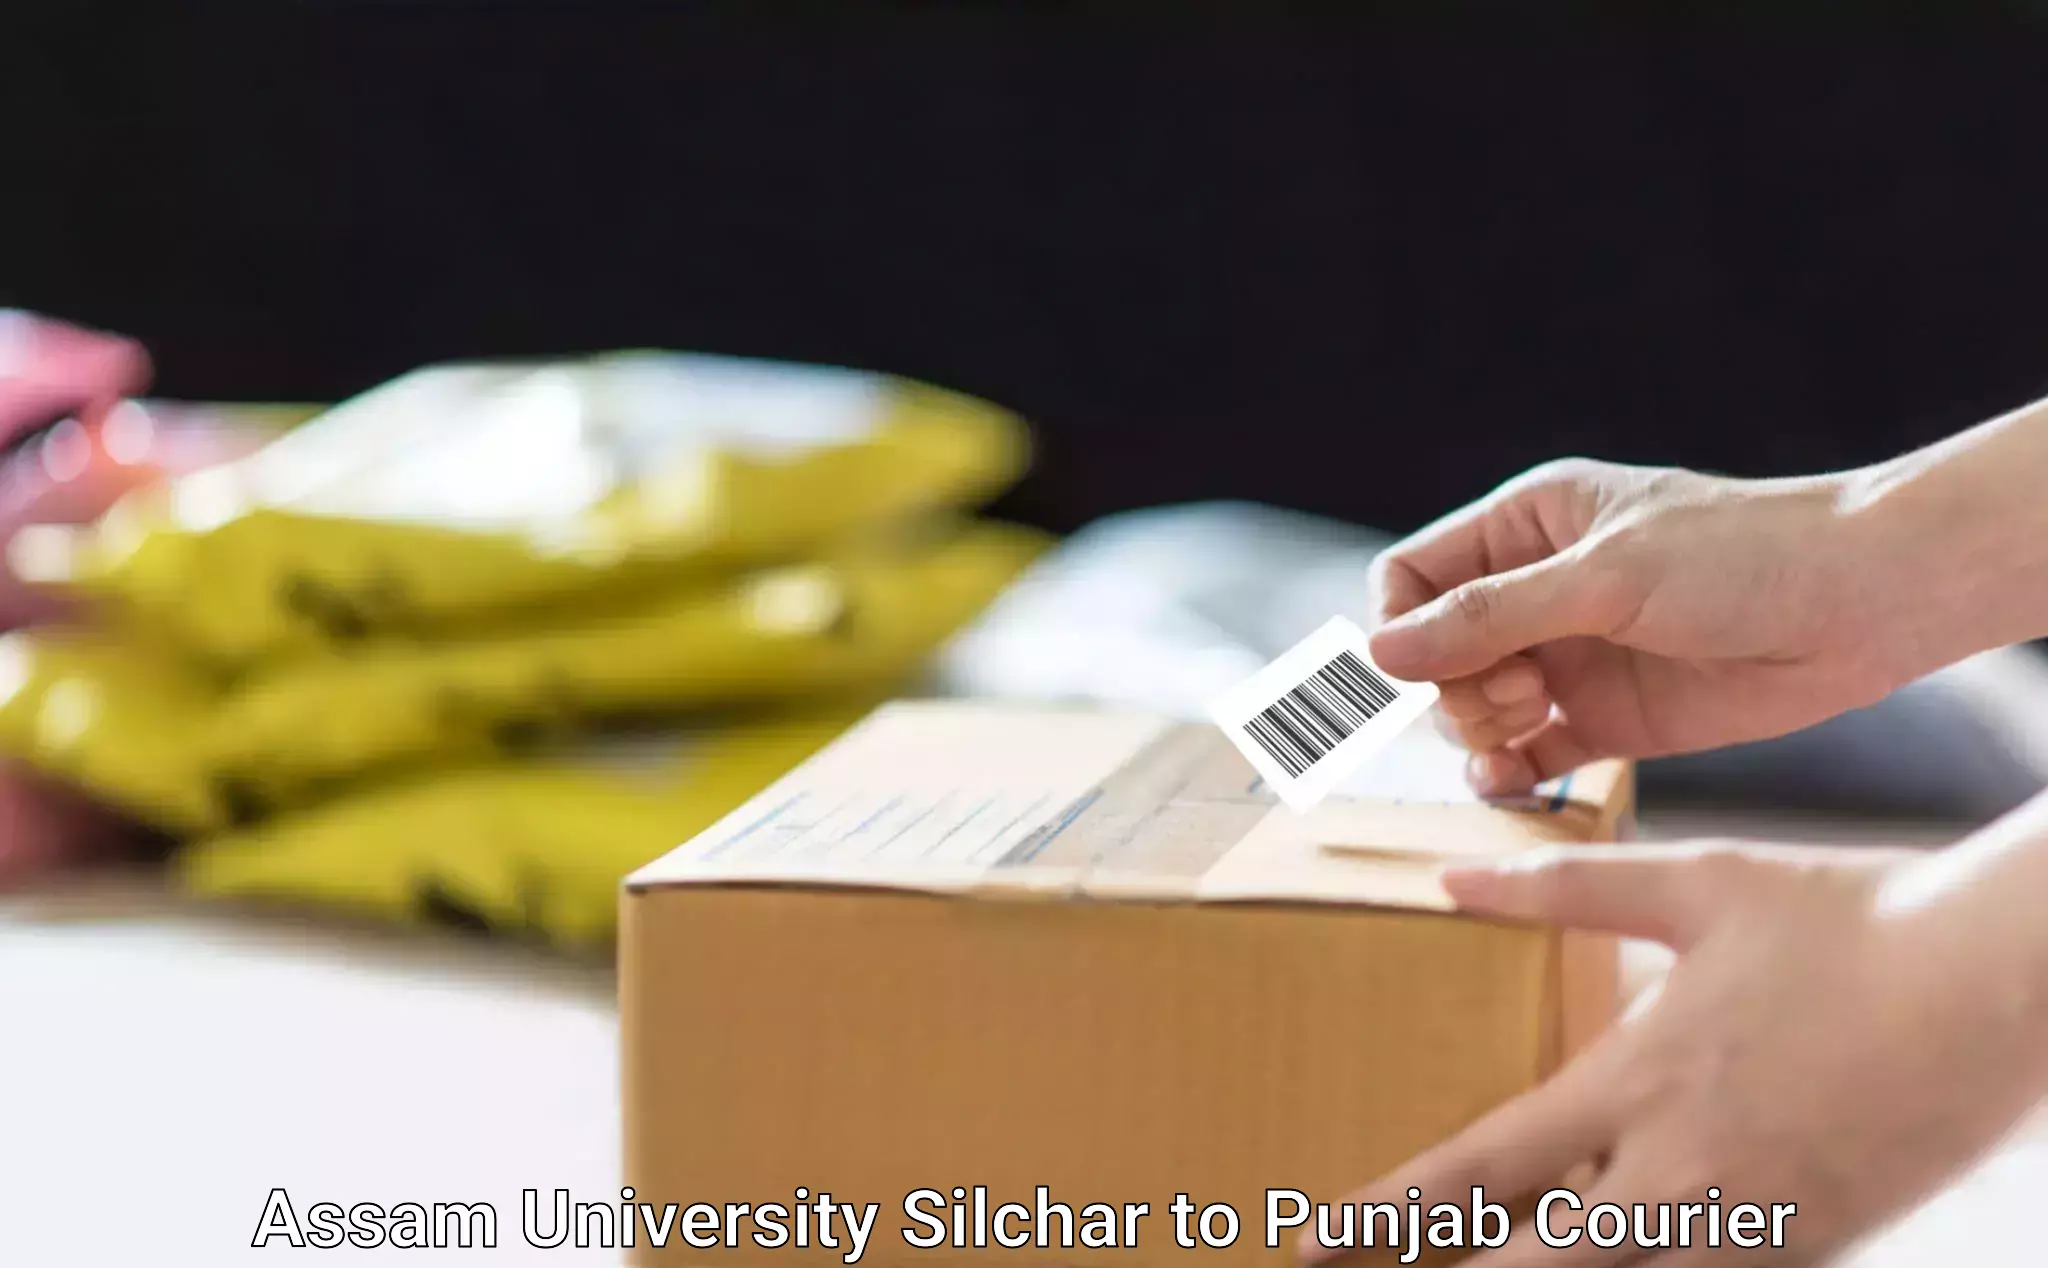 Tech-enabled shipping Assam University Silchar to Dhilwan